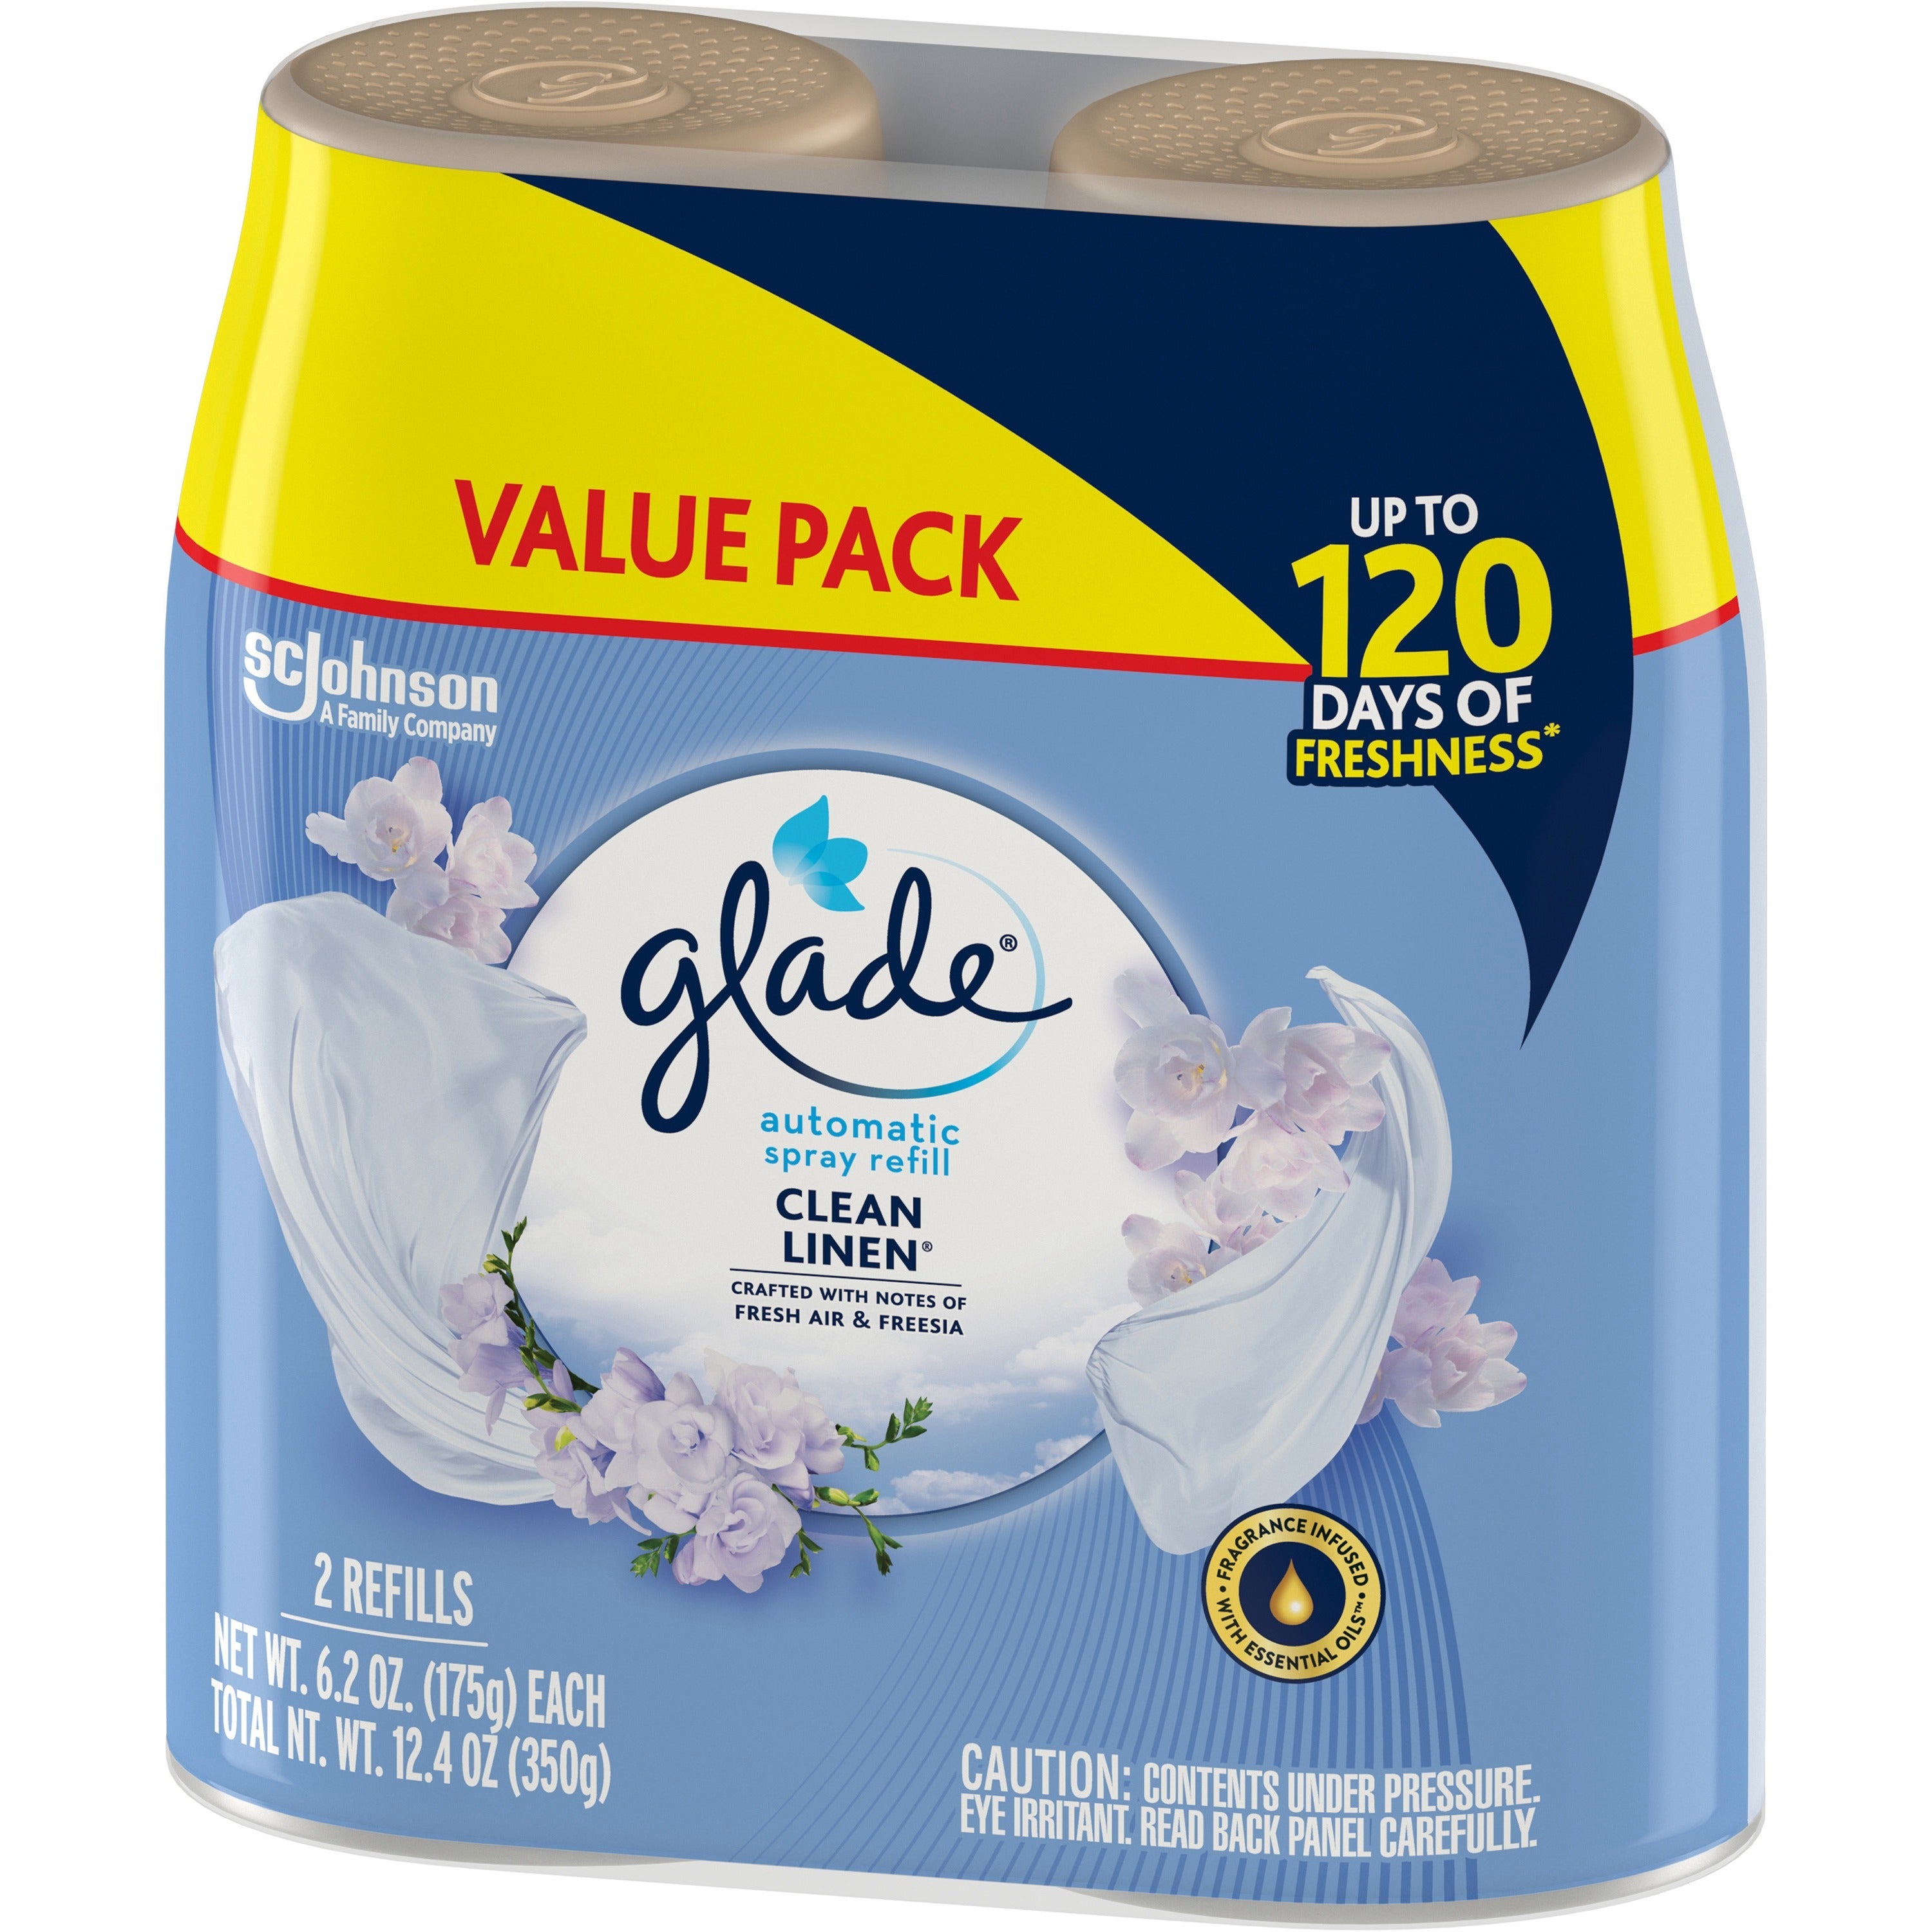 glade-automatic-spray-refill-value-pack-1240-oz-clean-linen-60-day-2-pack-long-lasting-phthalate-free-paraben-free-formaldehyde-free_sjn329388 - 2